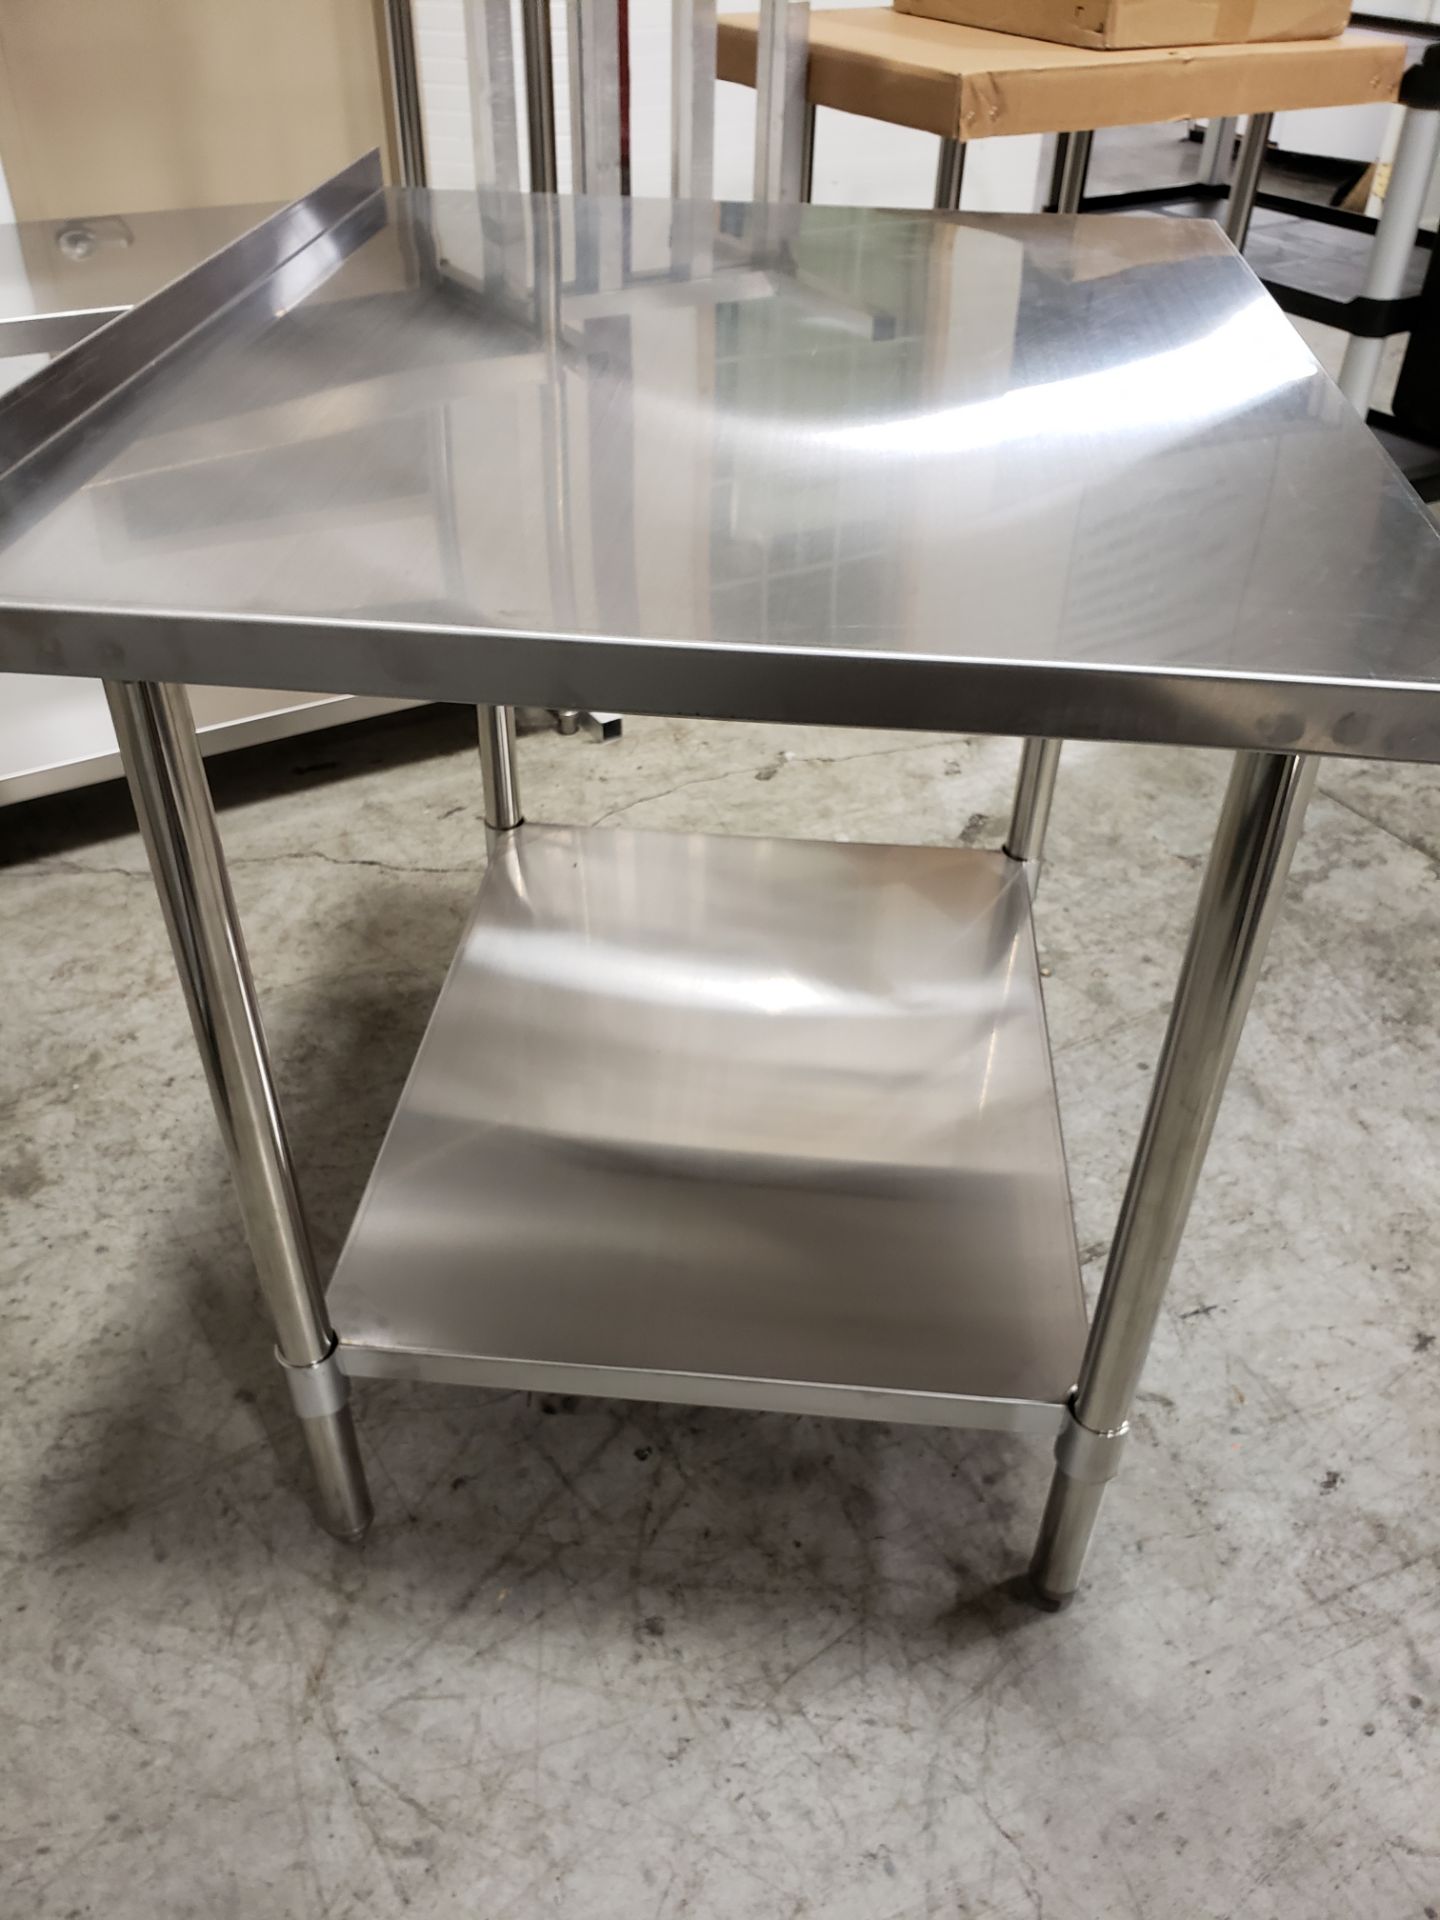 36" x 30" All Stainless Work Table with 1.5" Back Splash - 34" High - Image 2 of 5